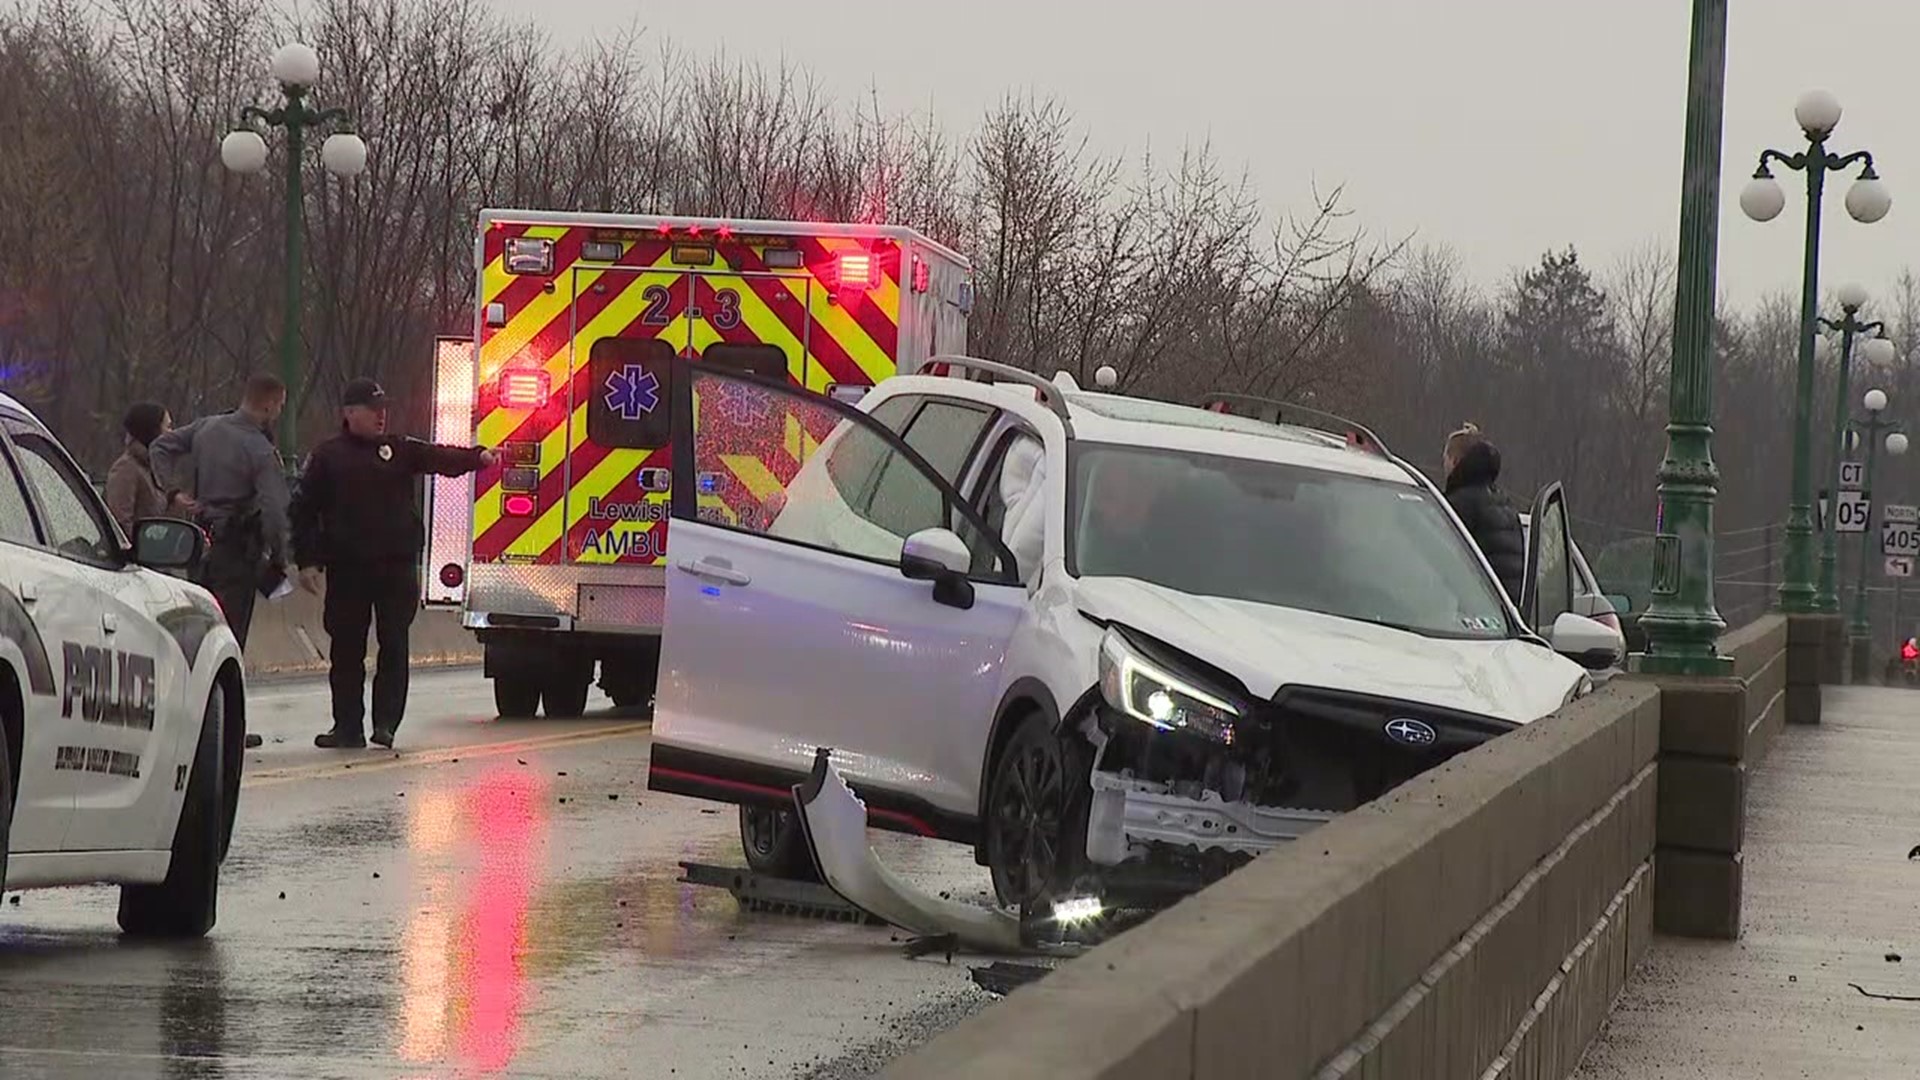 Two cars collided on the Route 54 bridge in West Chillisquaque Township.